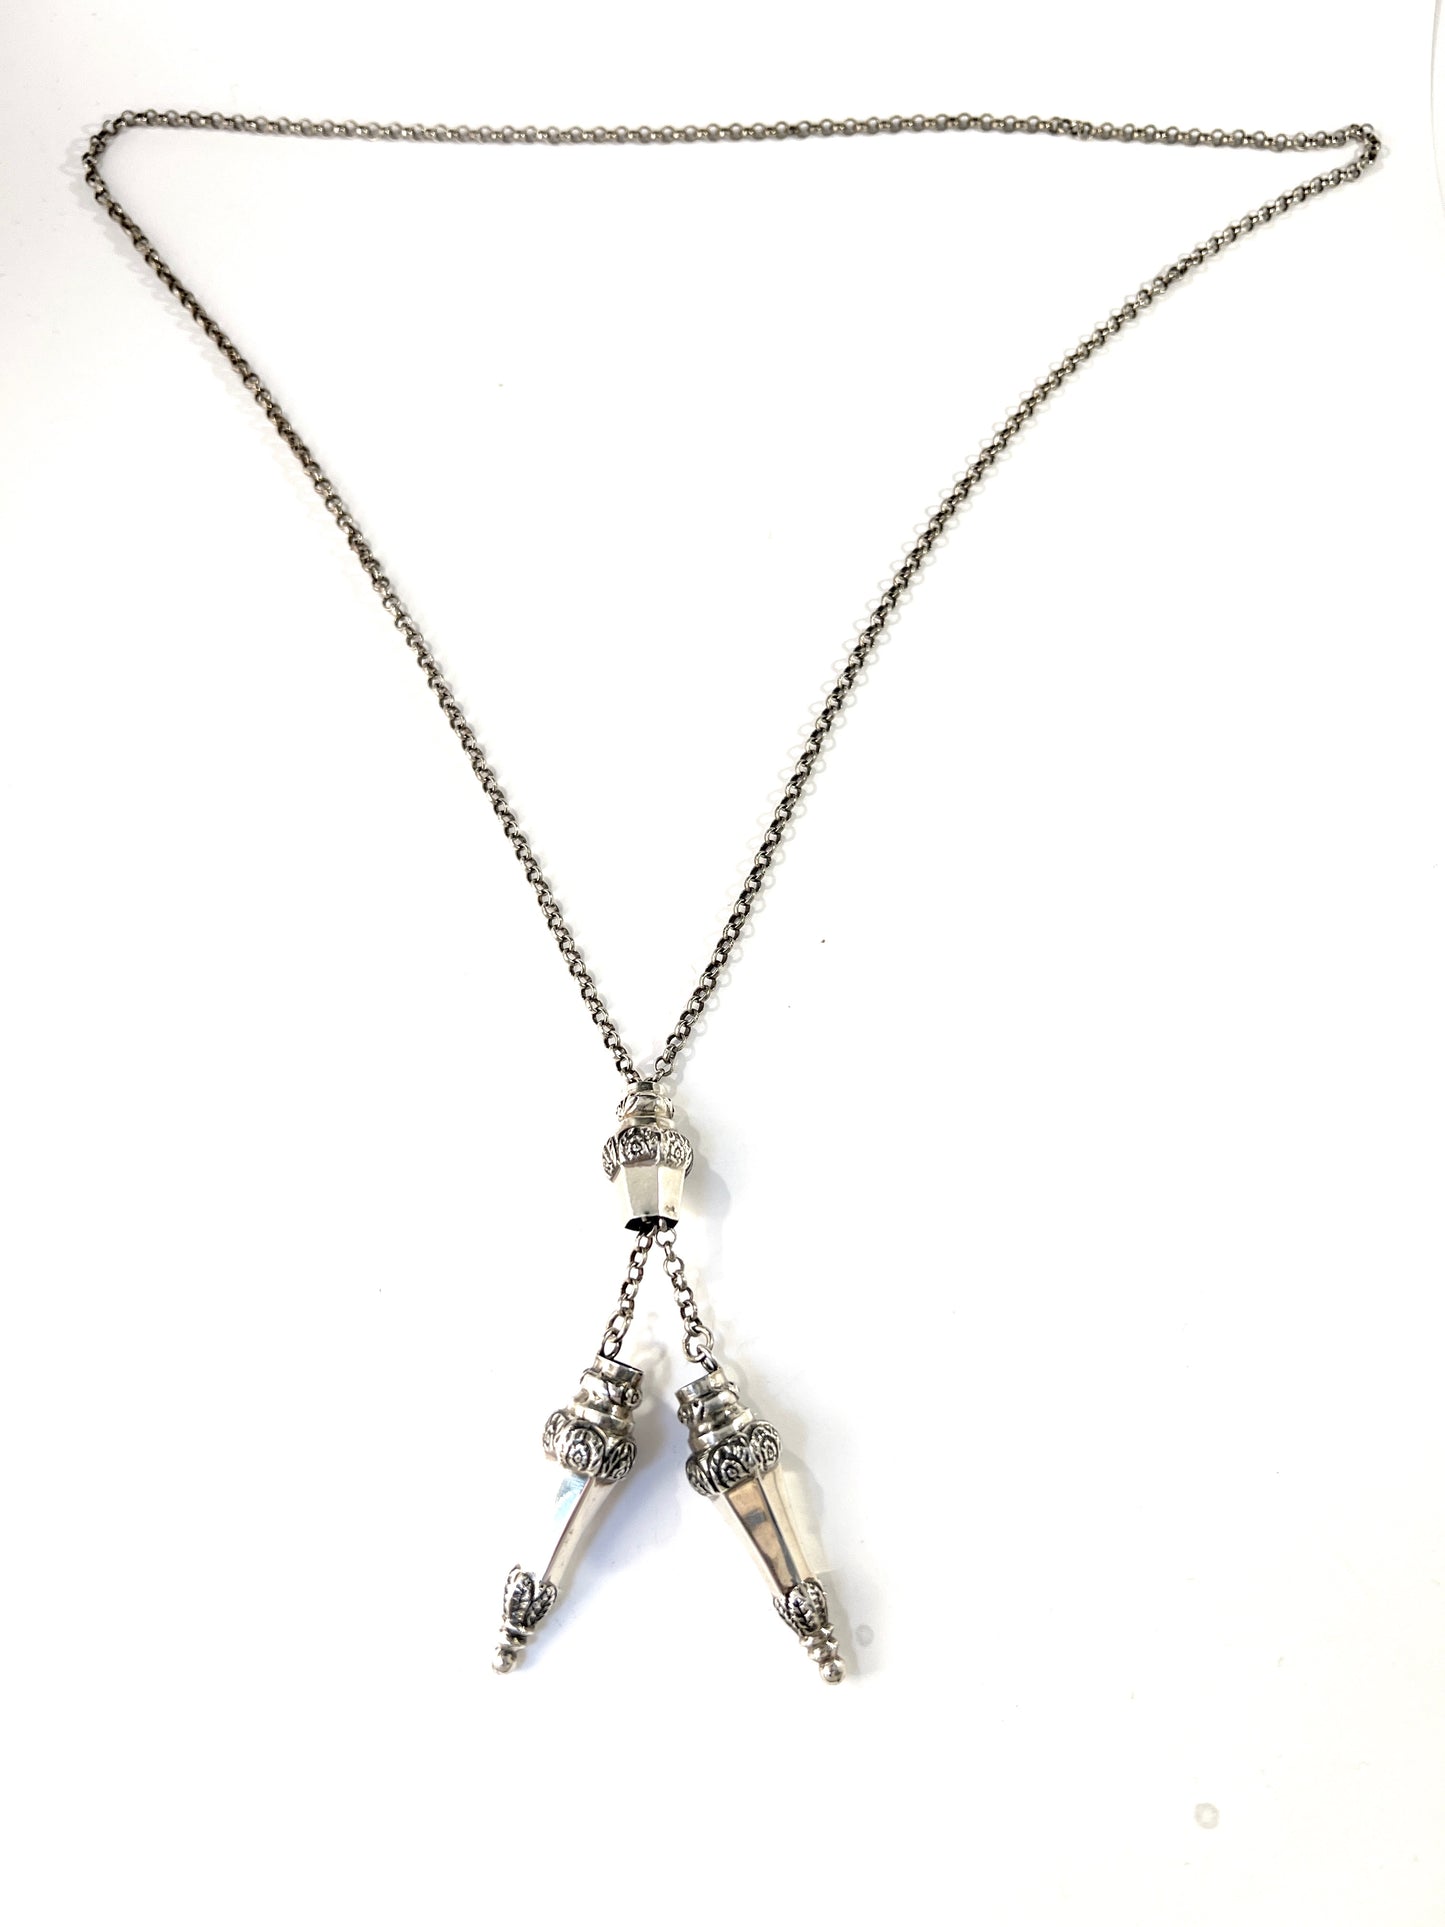 The Netherlands. Vintage 835 Silver Lariat Chain Necklace